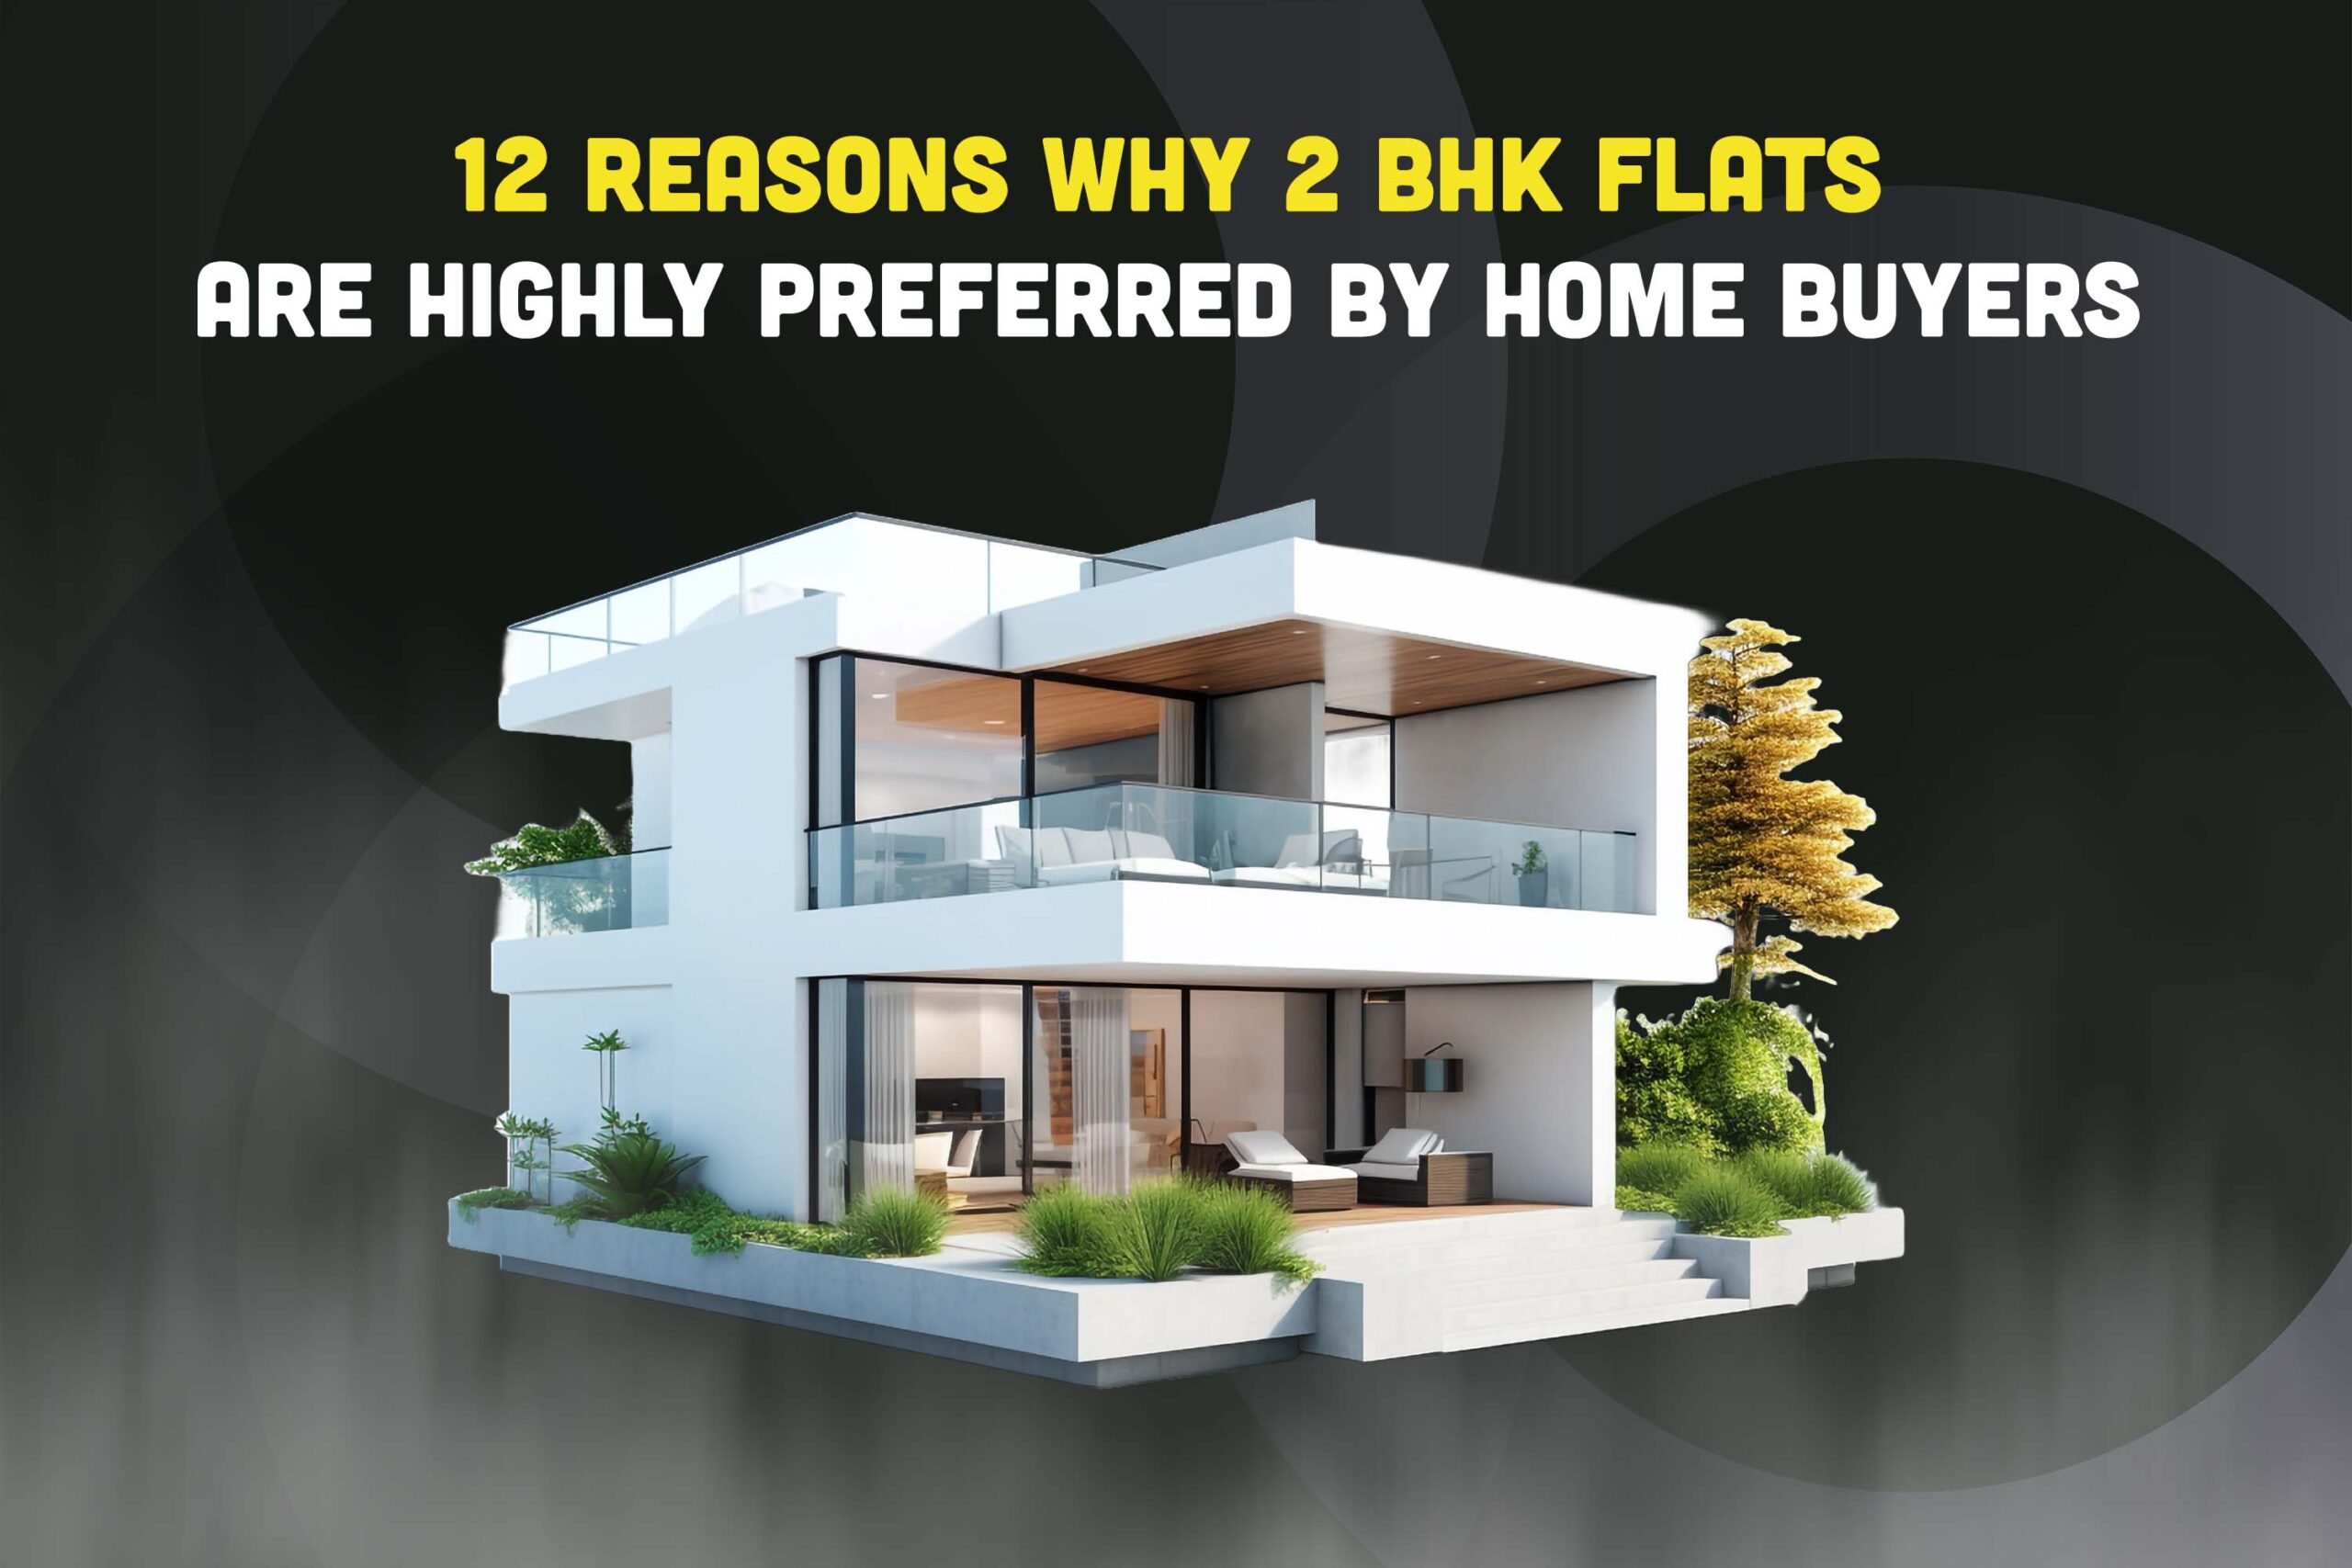 2 BHK Flats are highly preferred